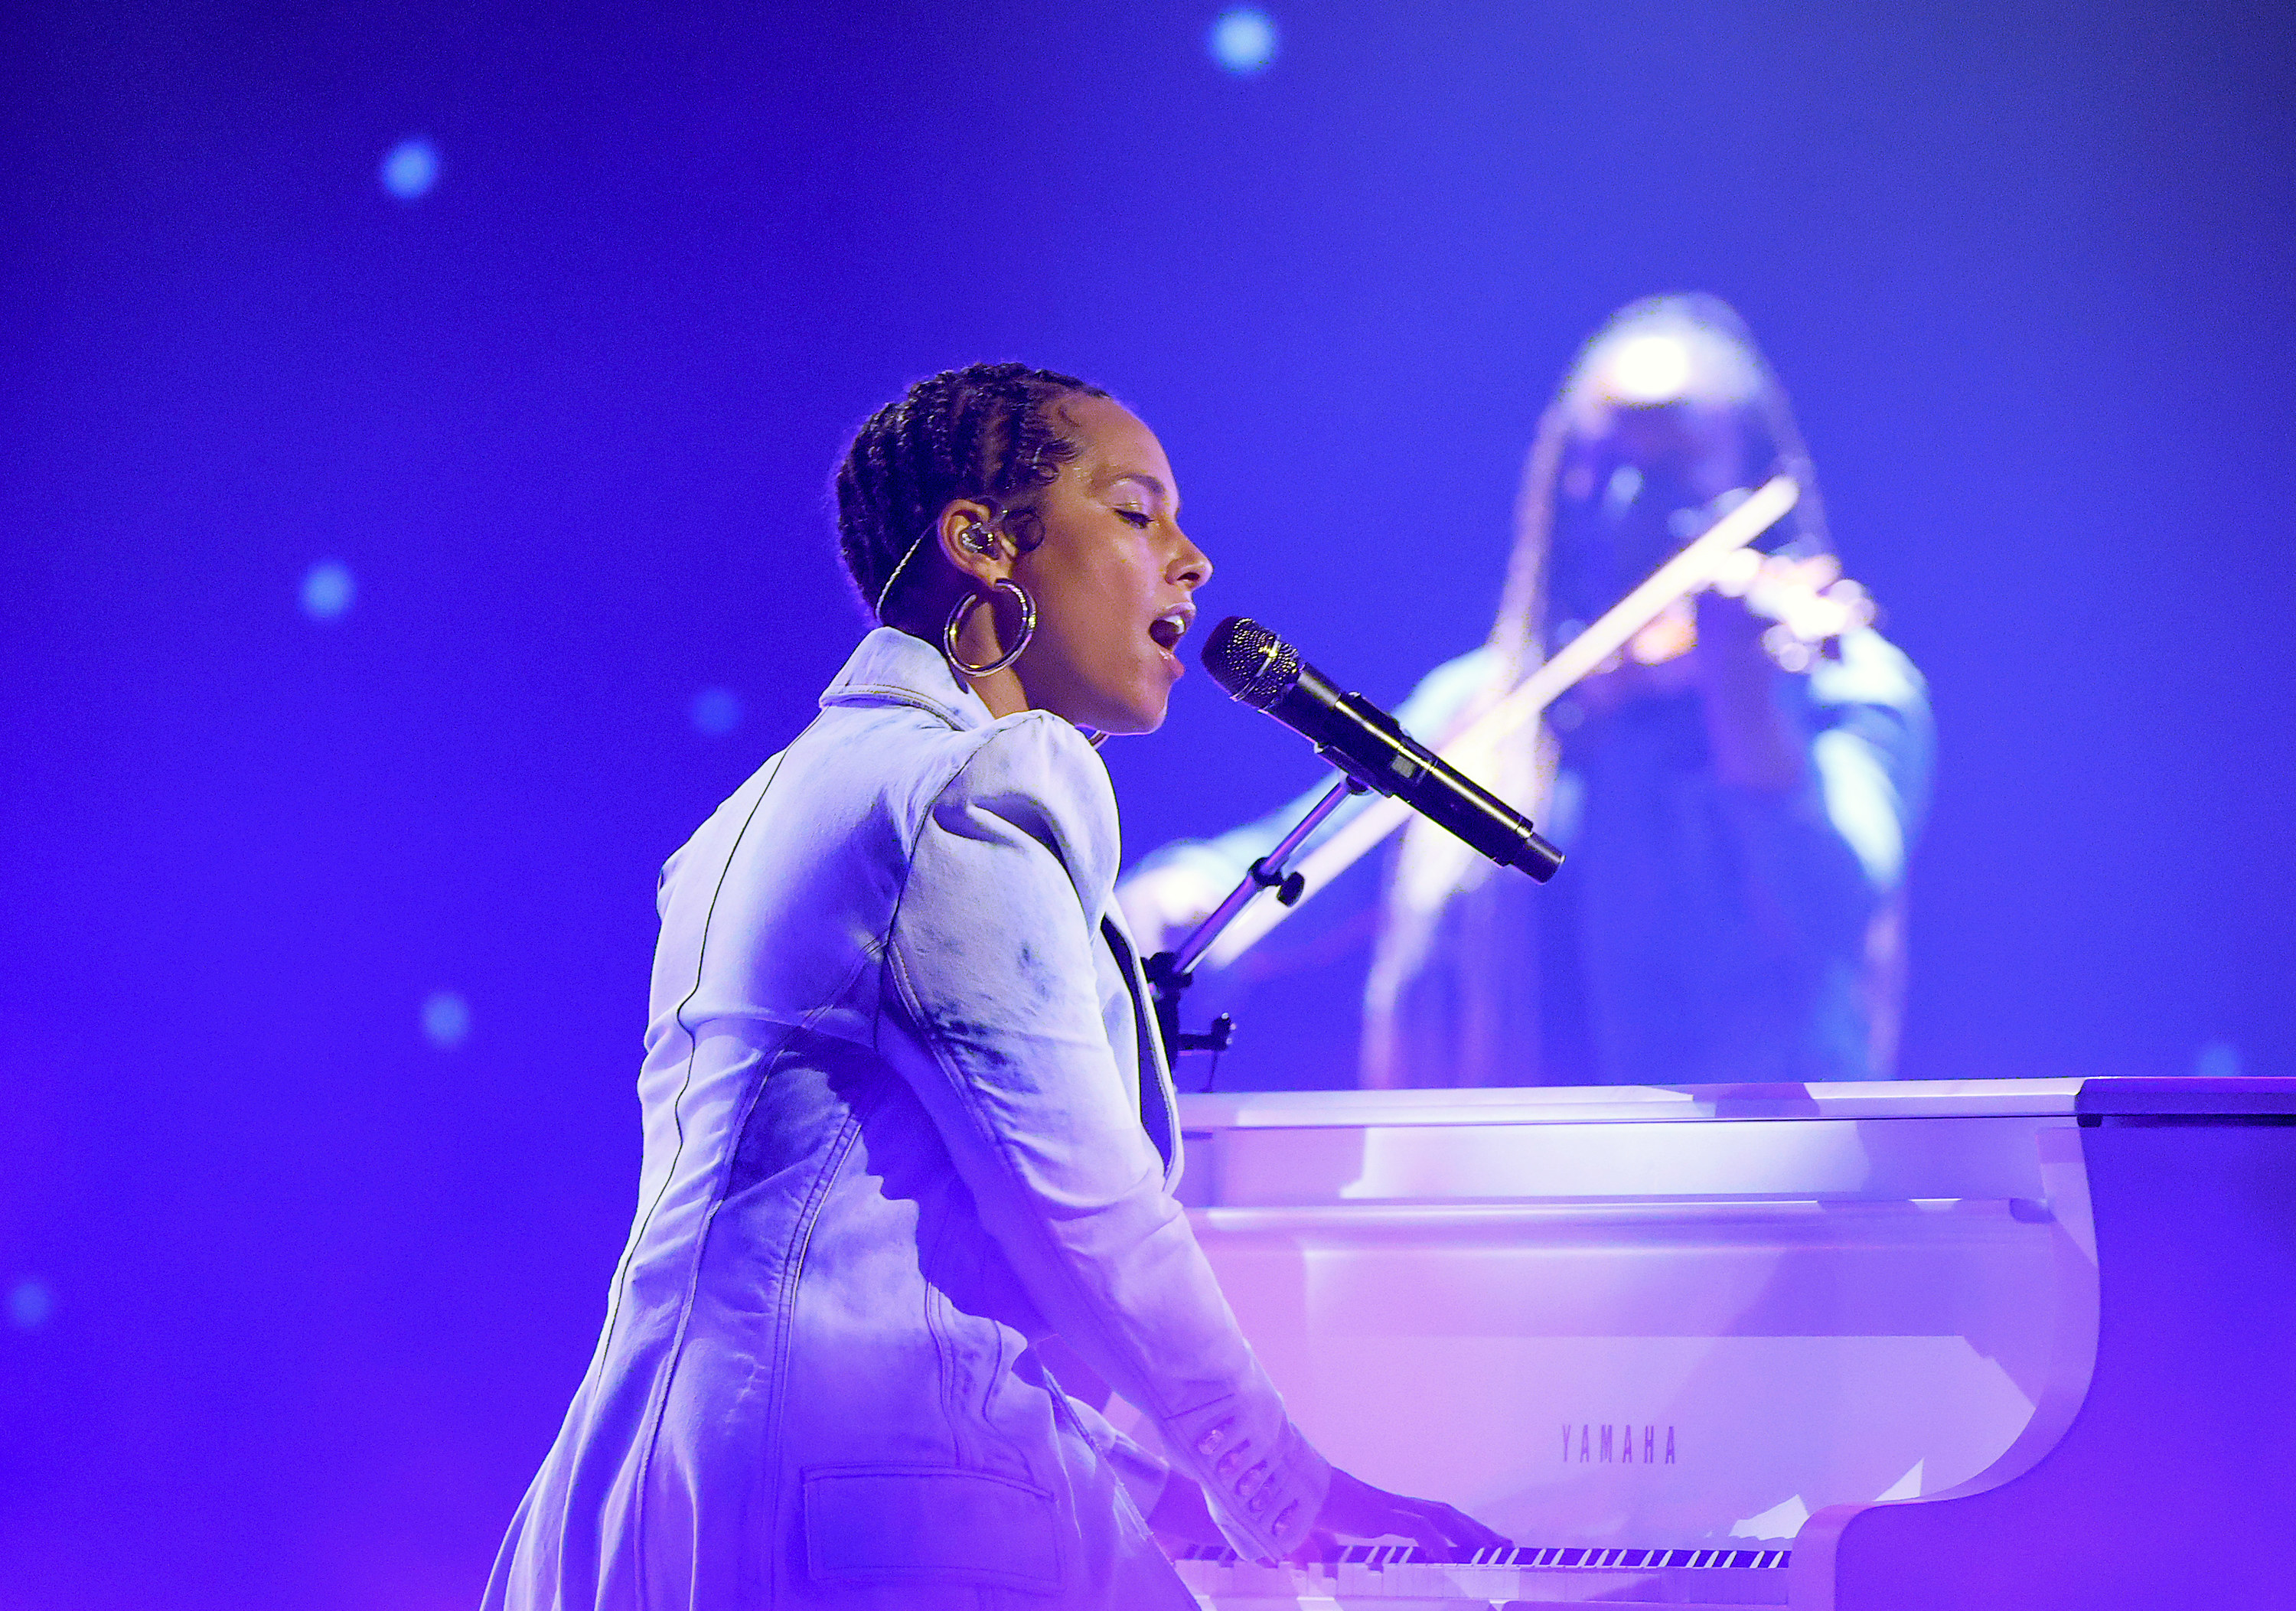 In this image released on May 23, Alicia Keys performs onstage for the 2021 Billboard Music Awards